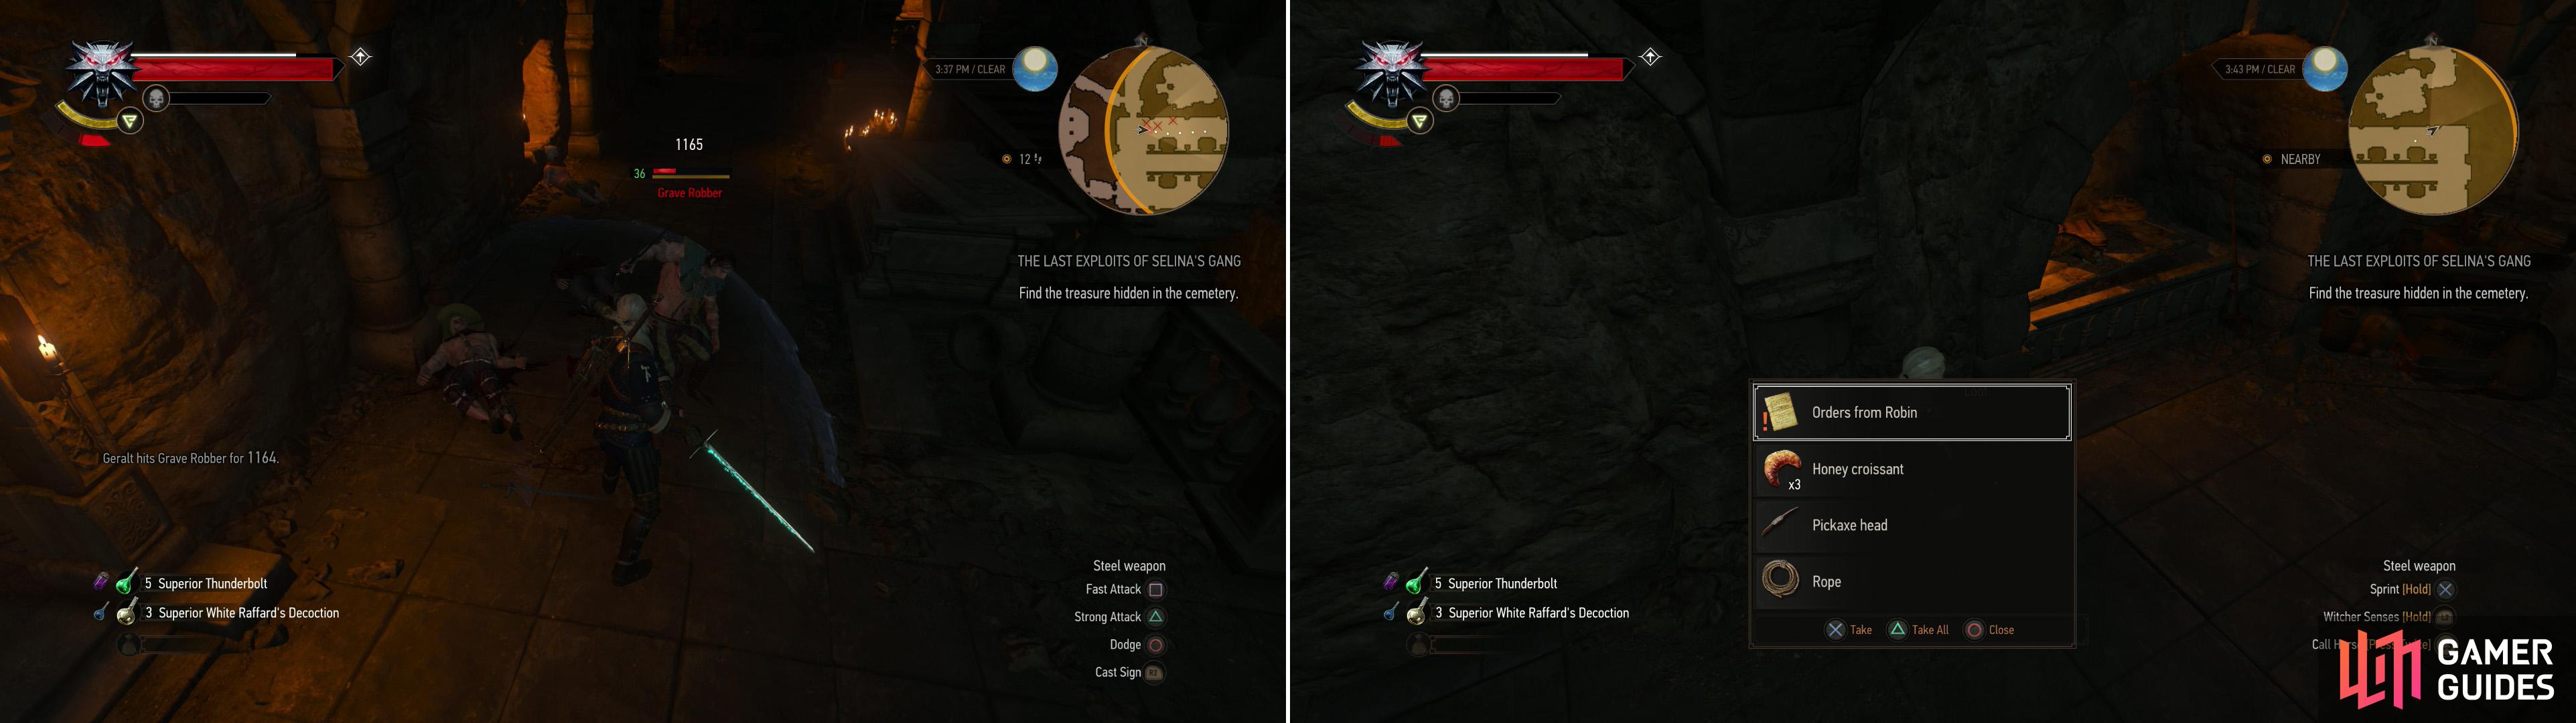 Kill the bandits in the crypt (left) then search some sacks to find some "Orders from Robin" (right).